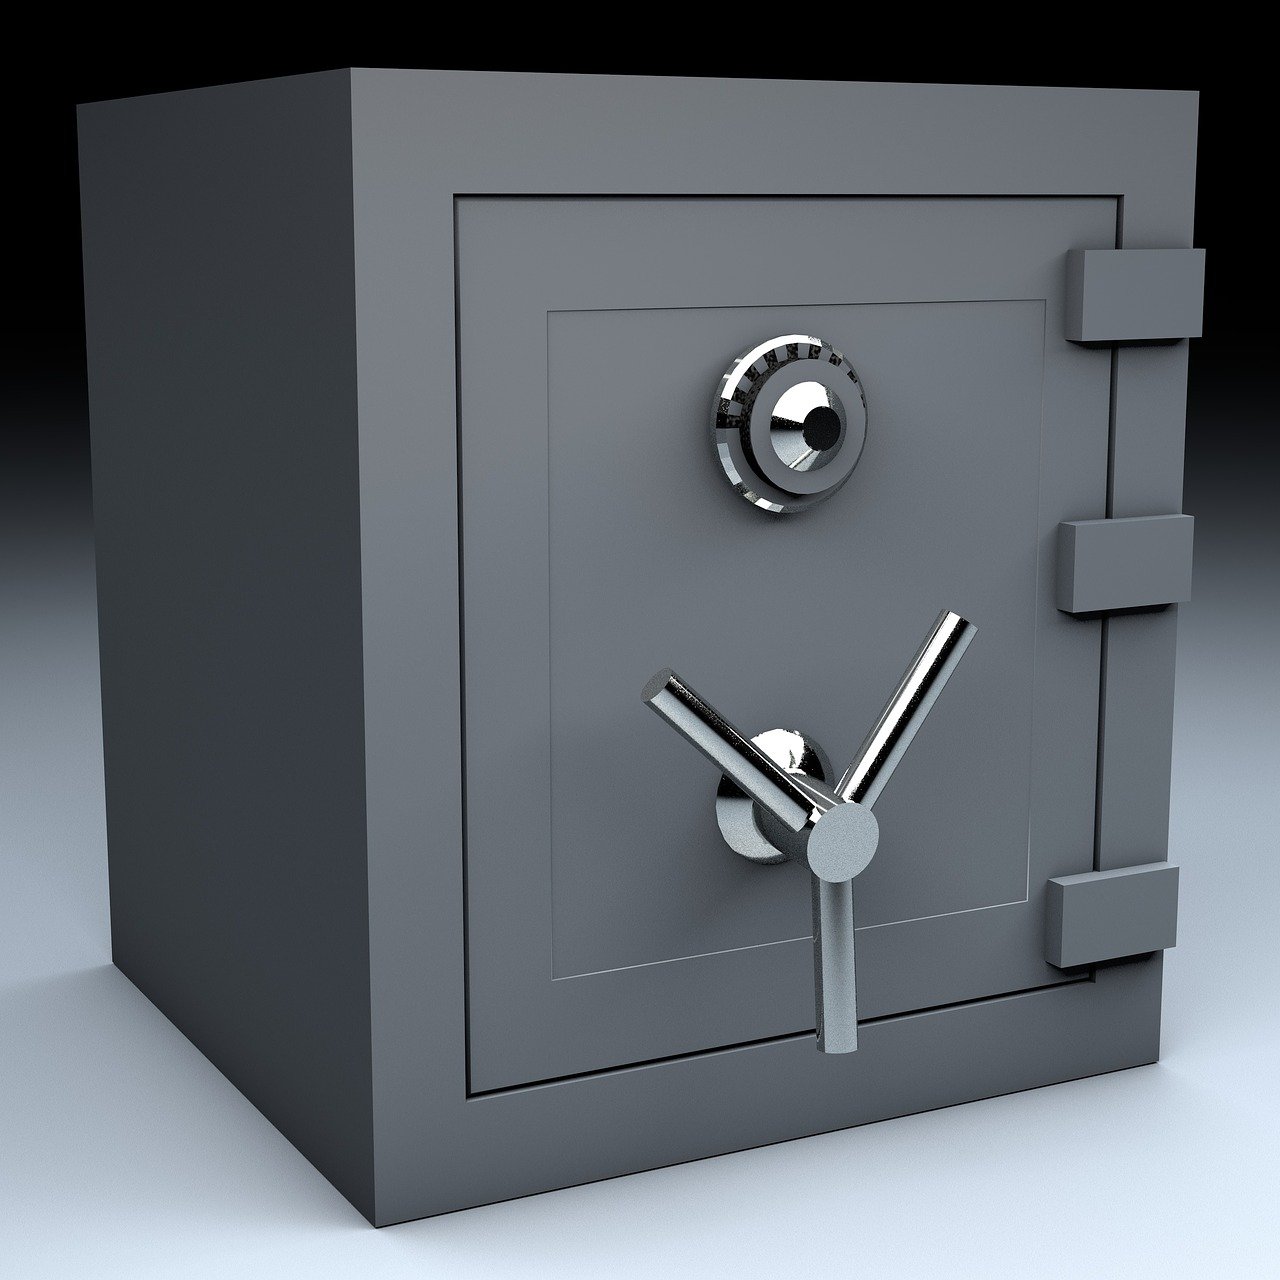 a safe box has an open door and a key in it